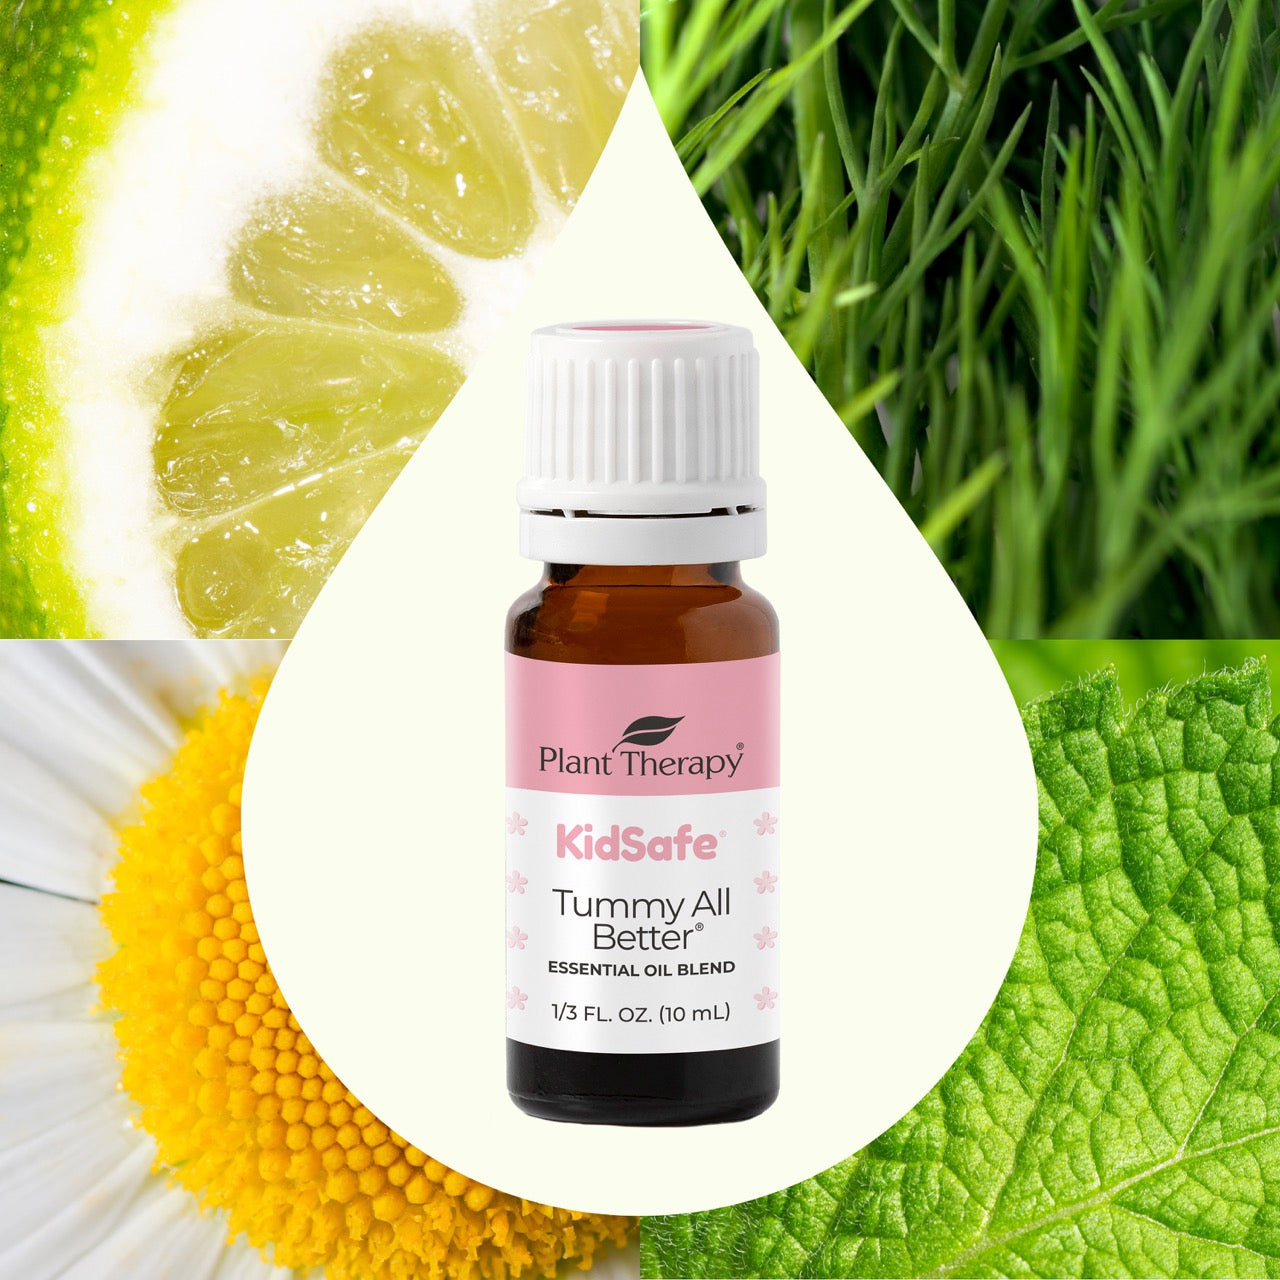 Tummy All Better KidSafe Essential Oil with key ingredient images